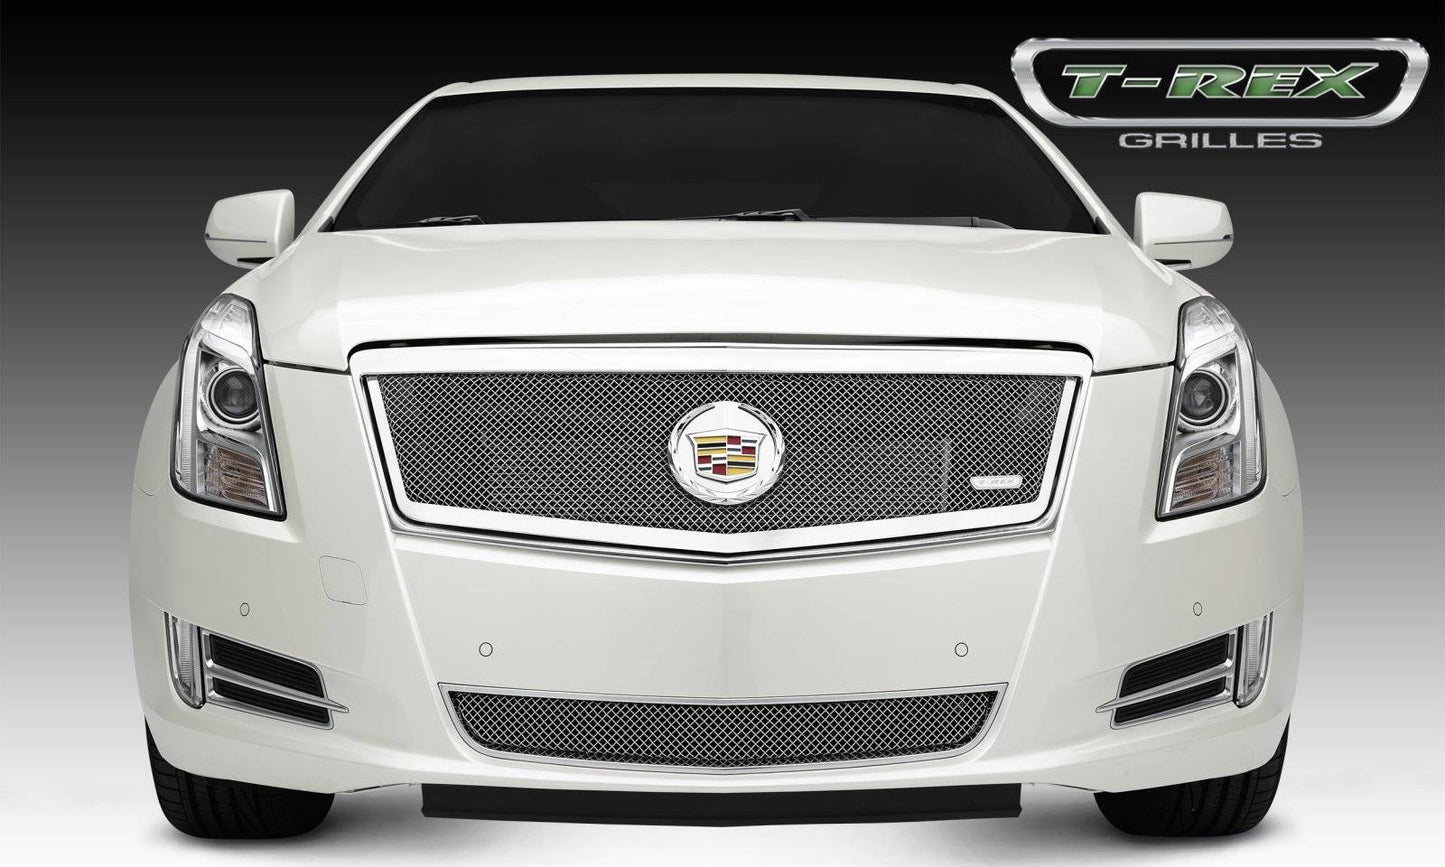 T-REX Grilles 54173 Polished Stainless Steel Small Mesh Grille Fits 2013-2014 Cadillac XTS